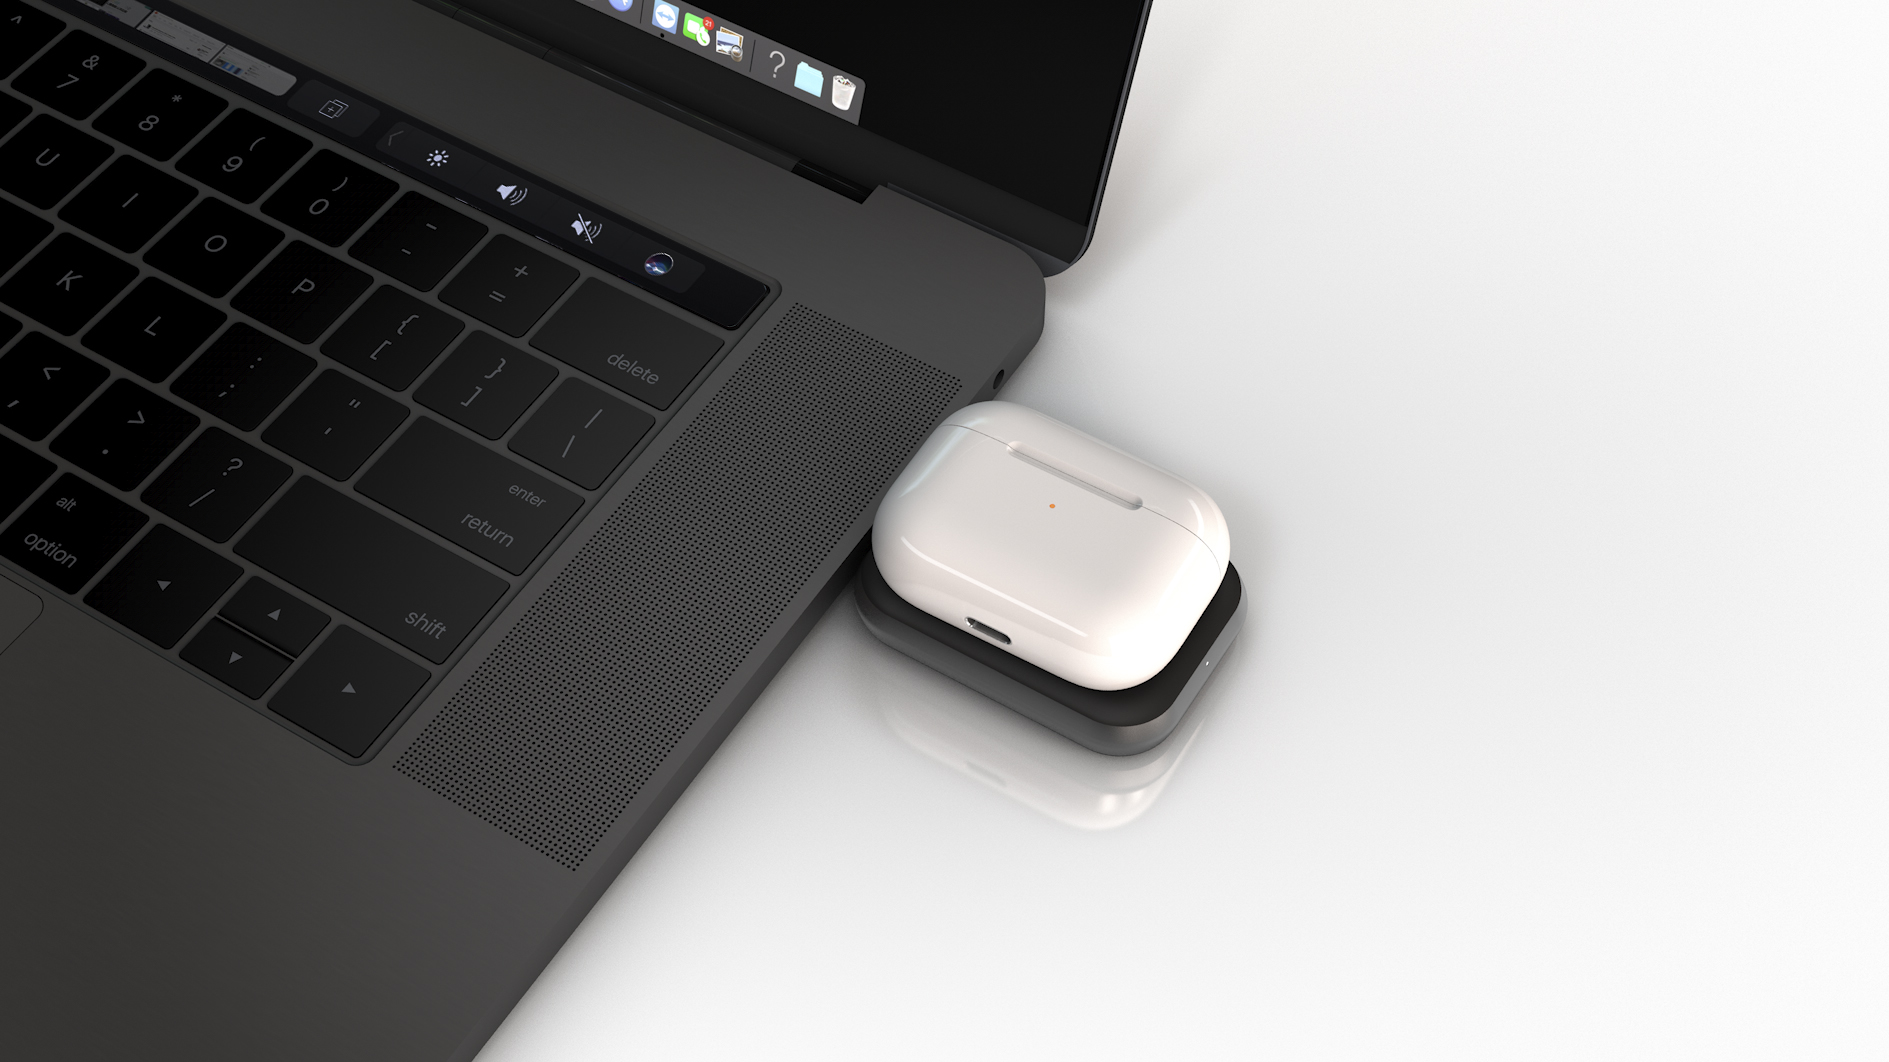 ZEAW03B ZENS Aluminium USB-C Stick for AirPods connected to MacBook while charging AirPods